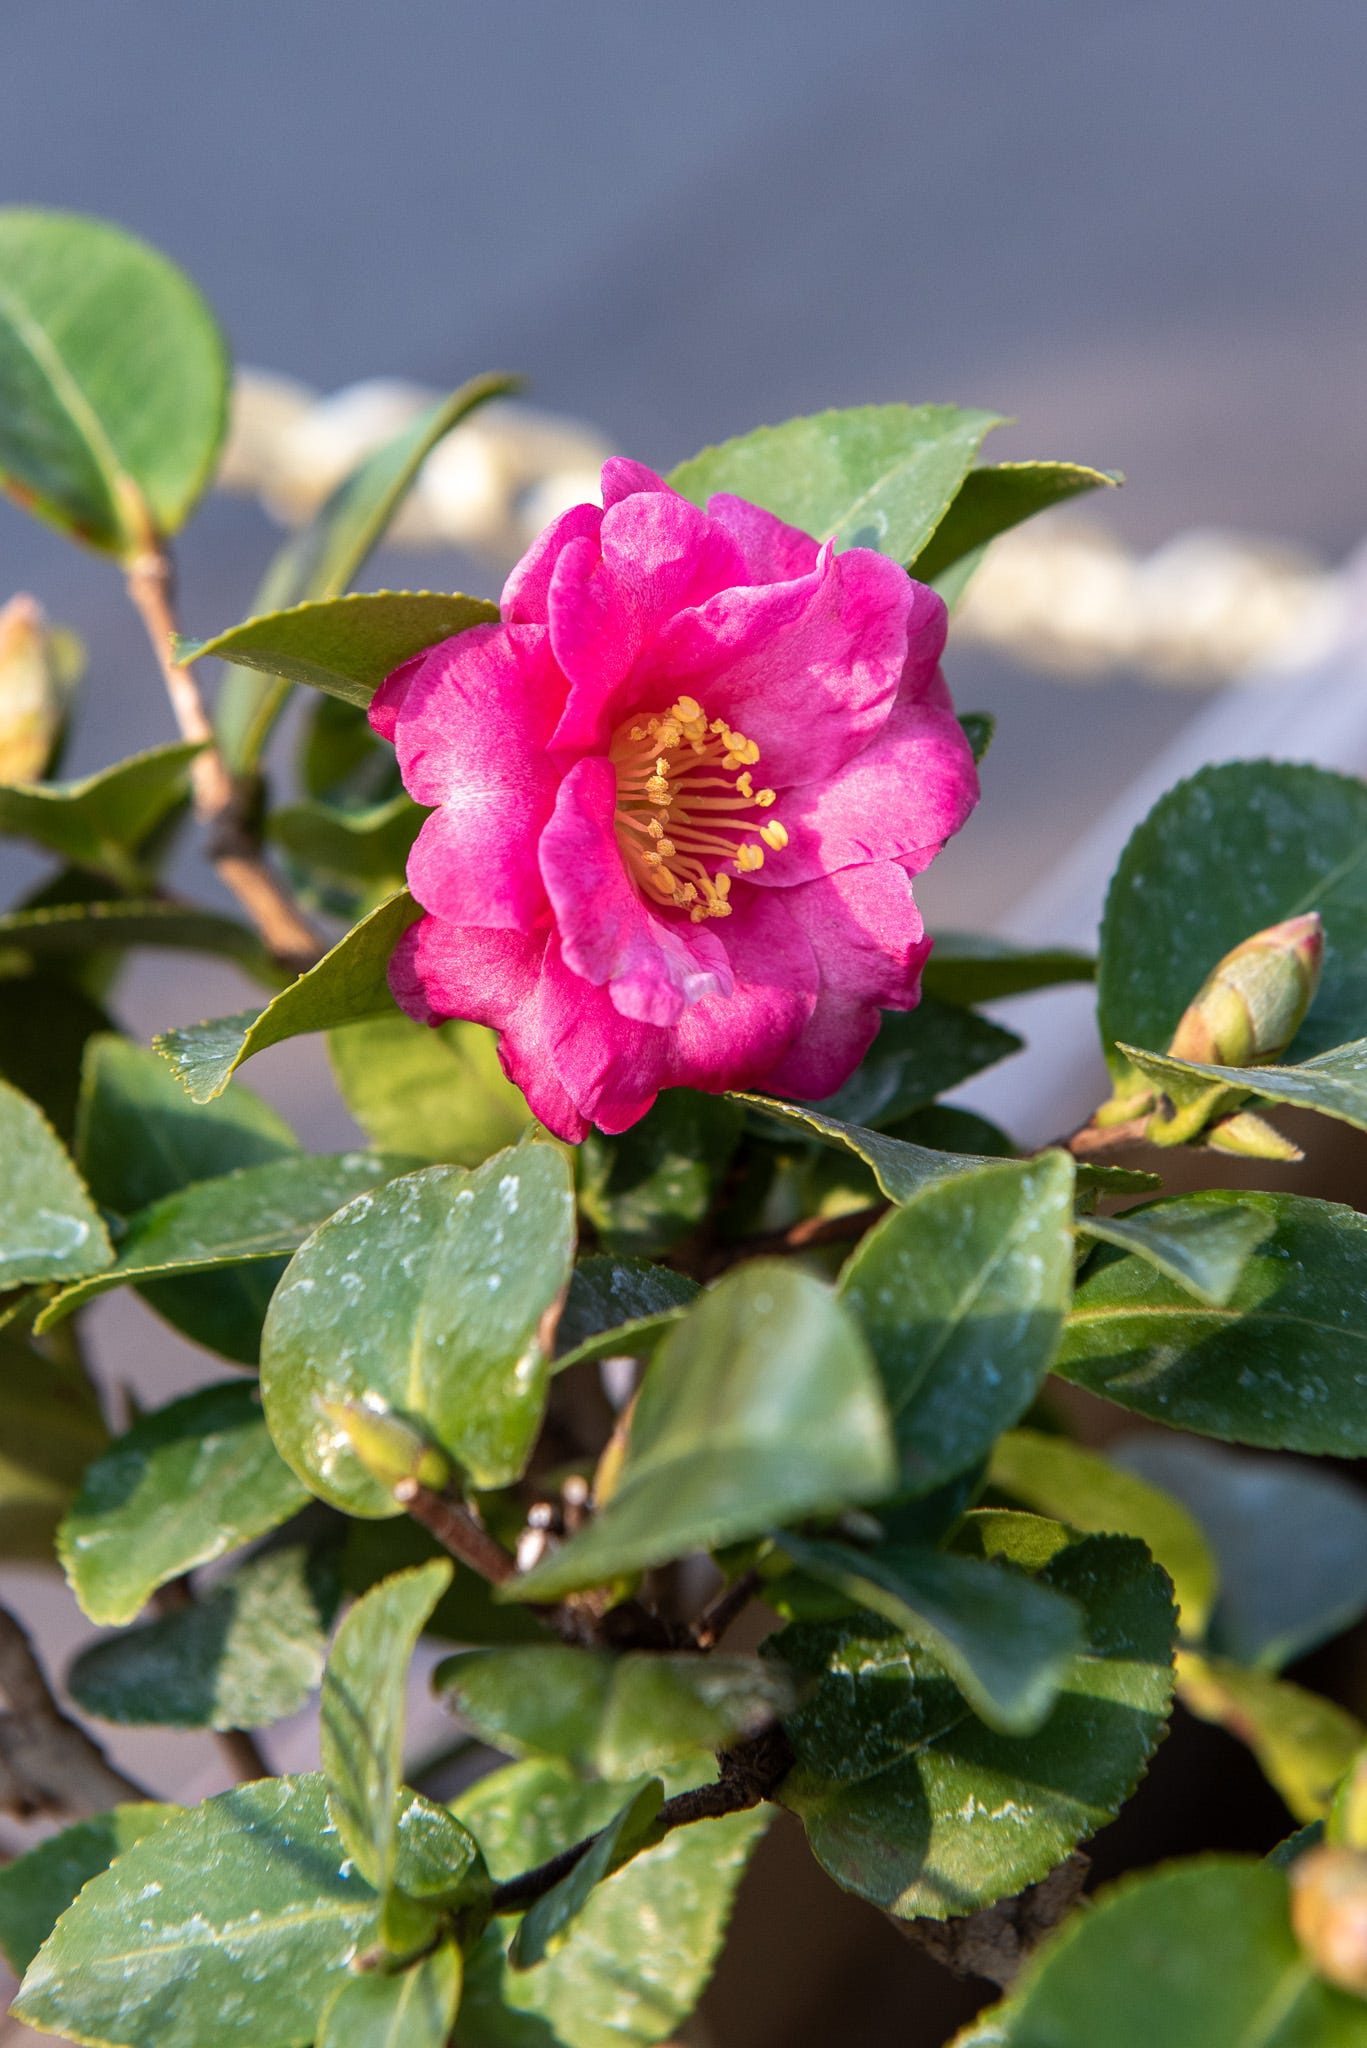 Photo of pink camellia flower against deep green foliage